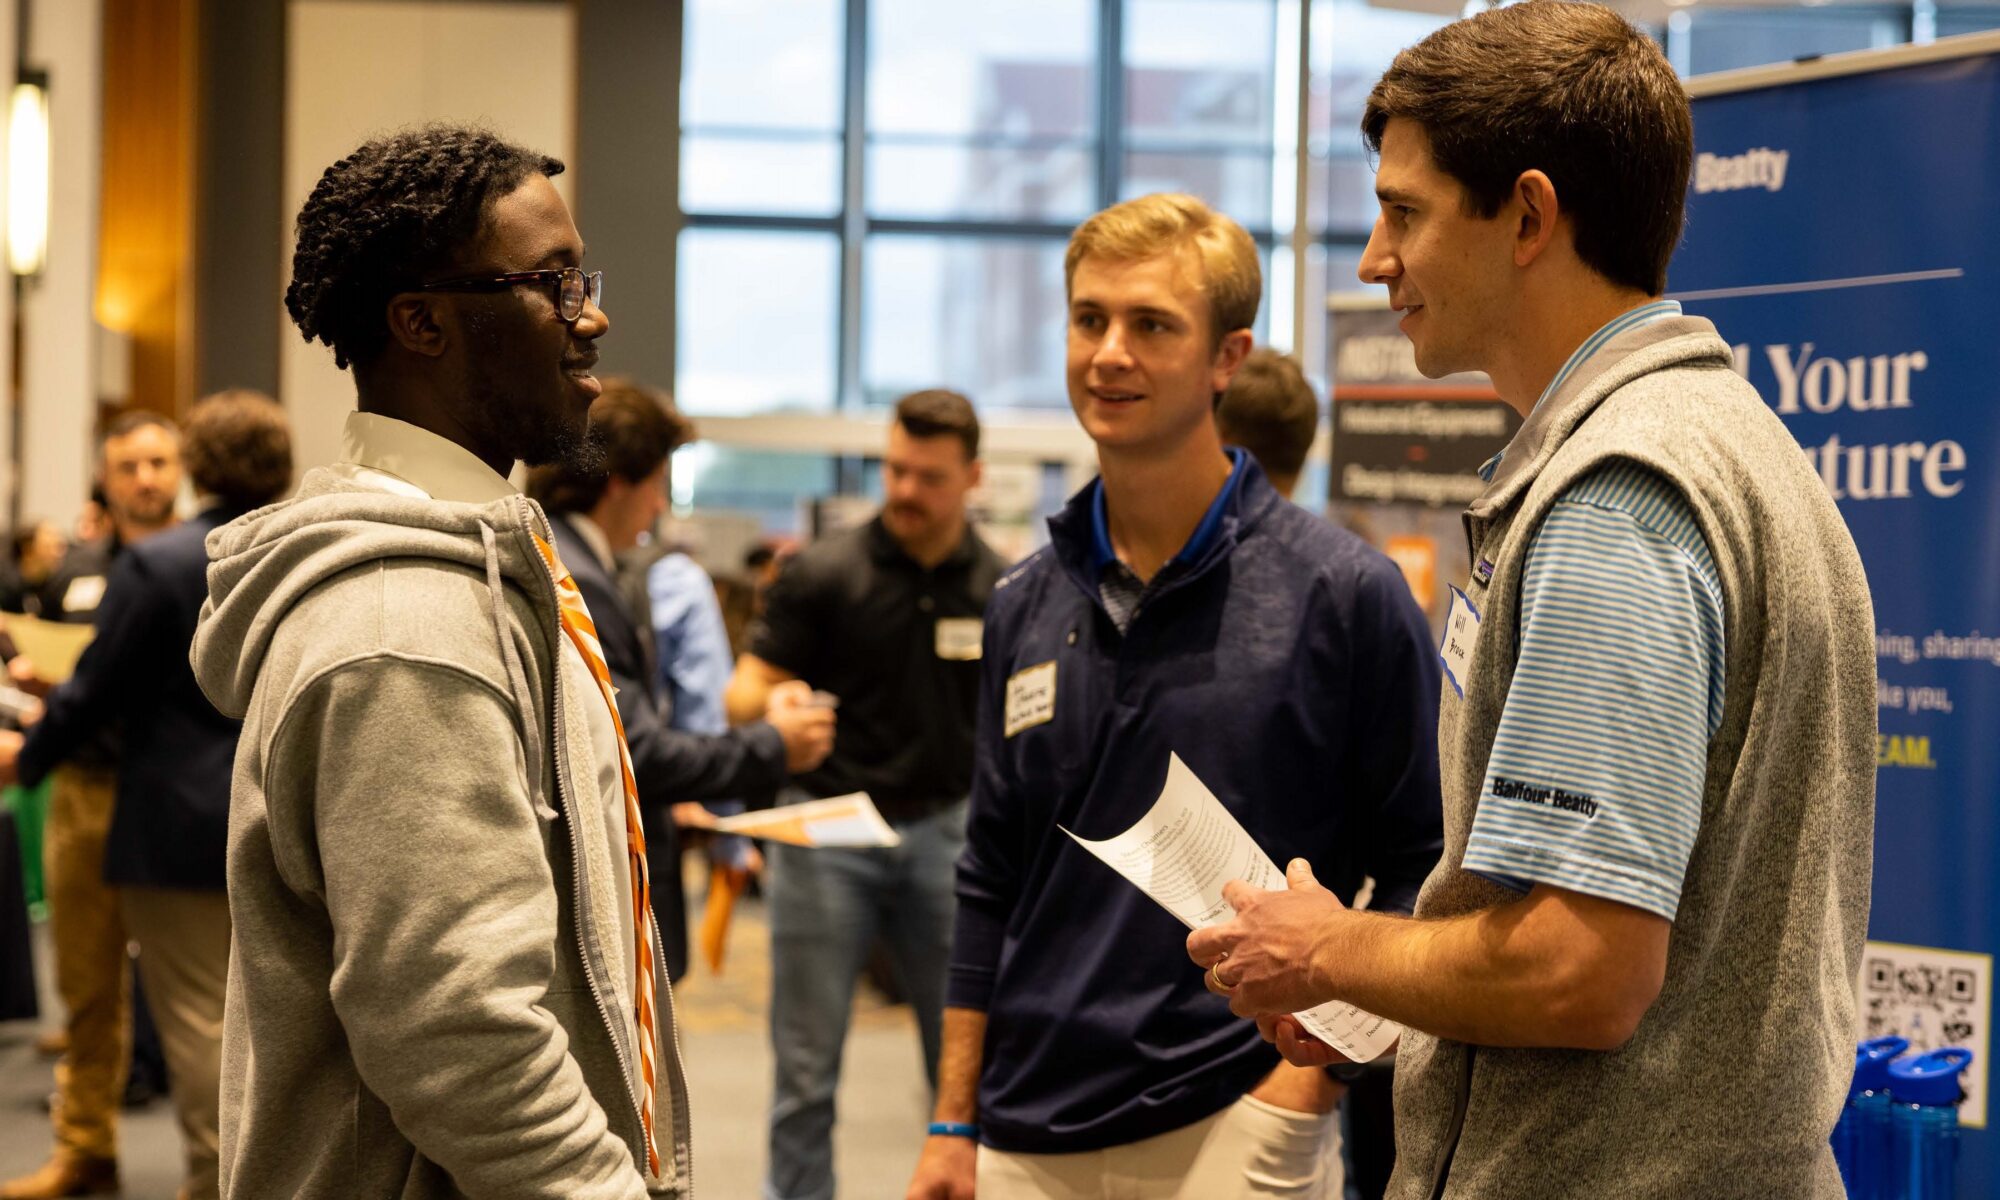 Student talking to two people from a potential employer from a company at a job fair